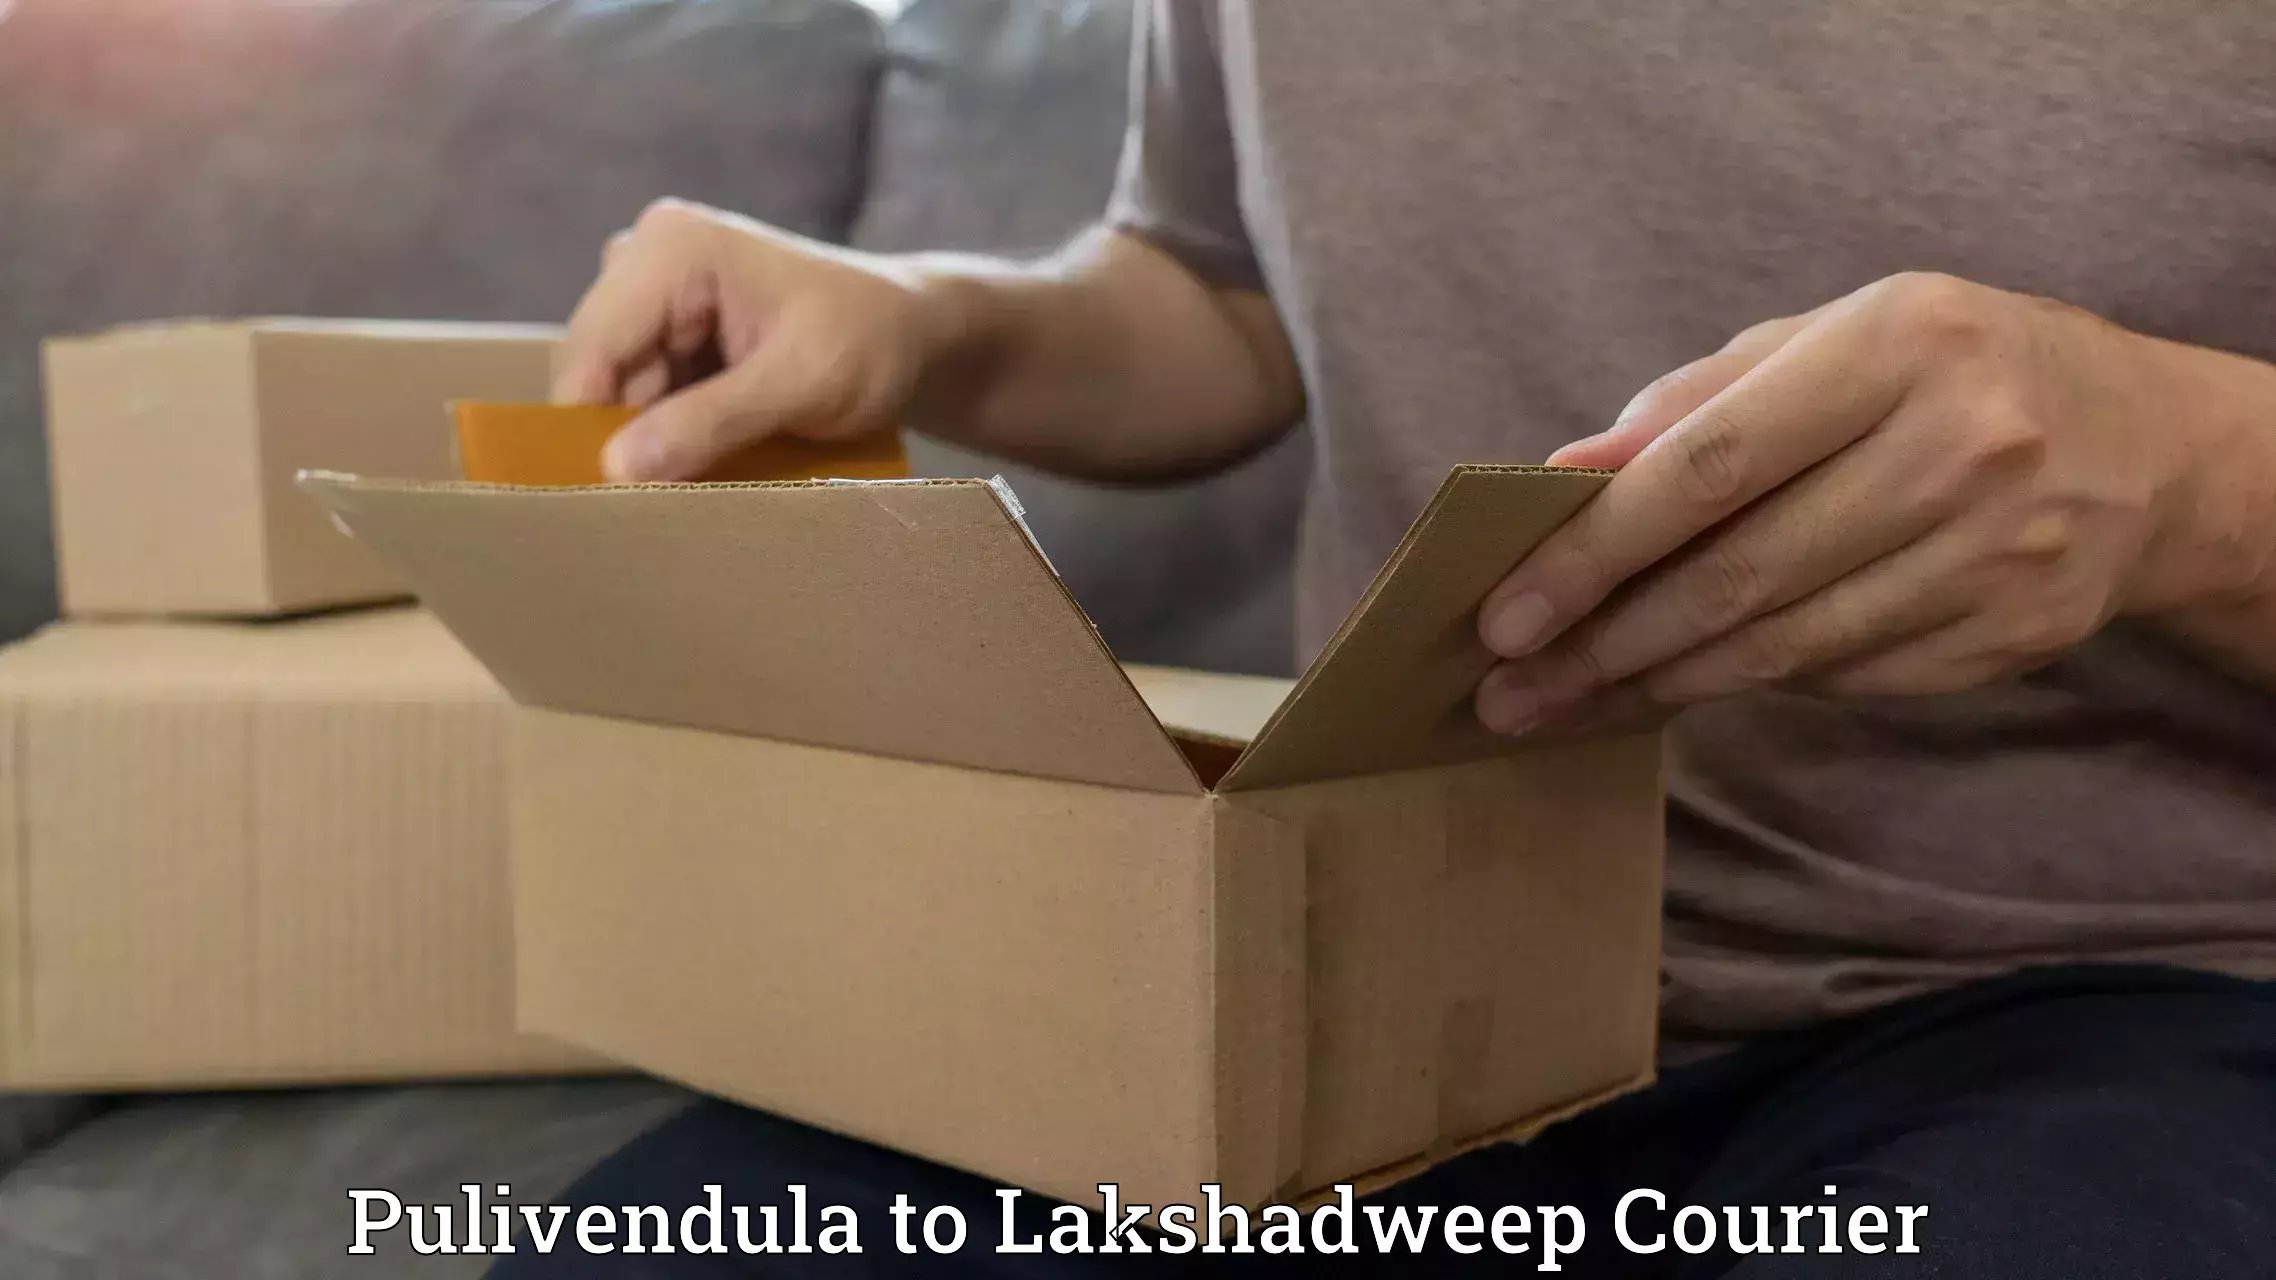 Overnight delivery services Pulivendula to Lakshadweep